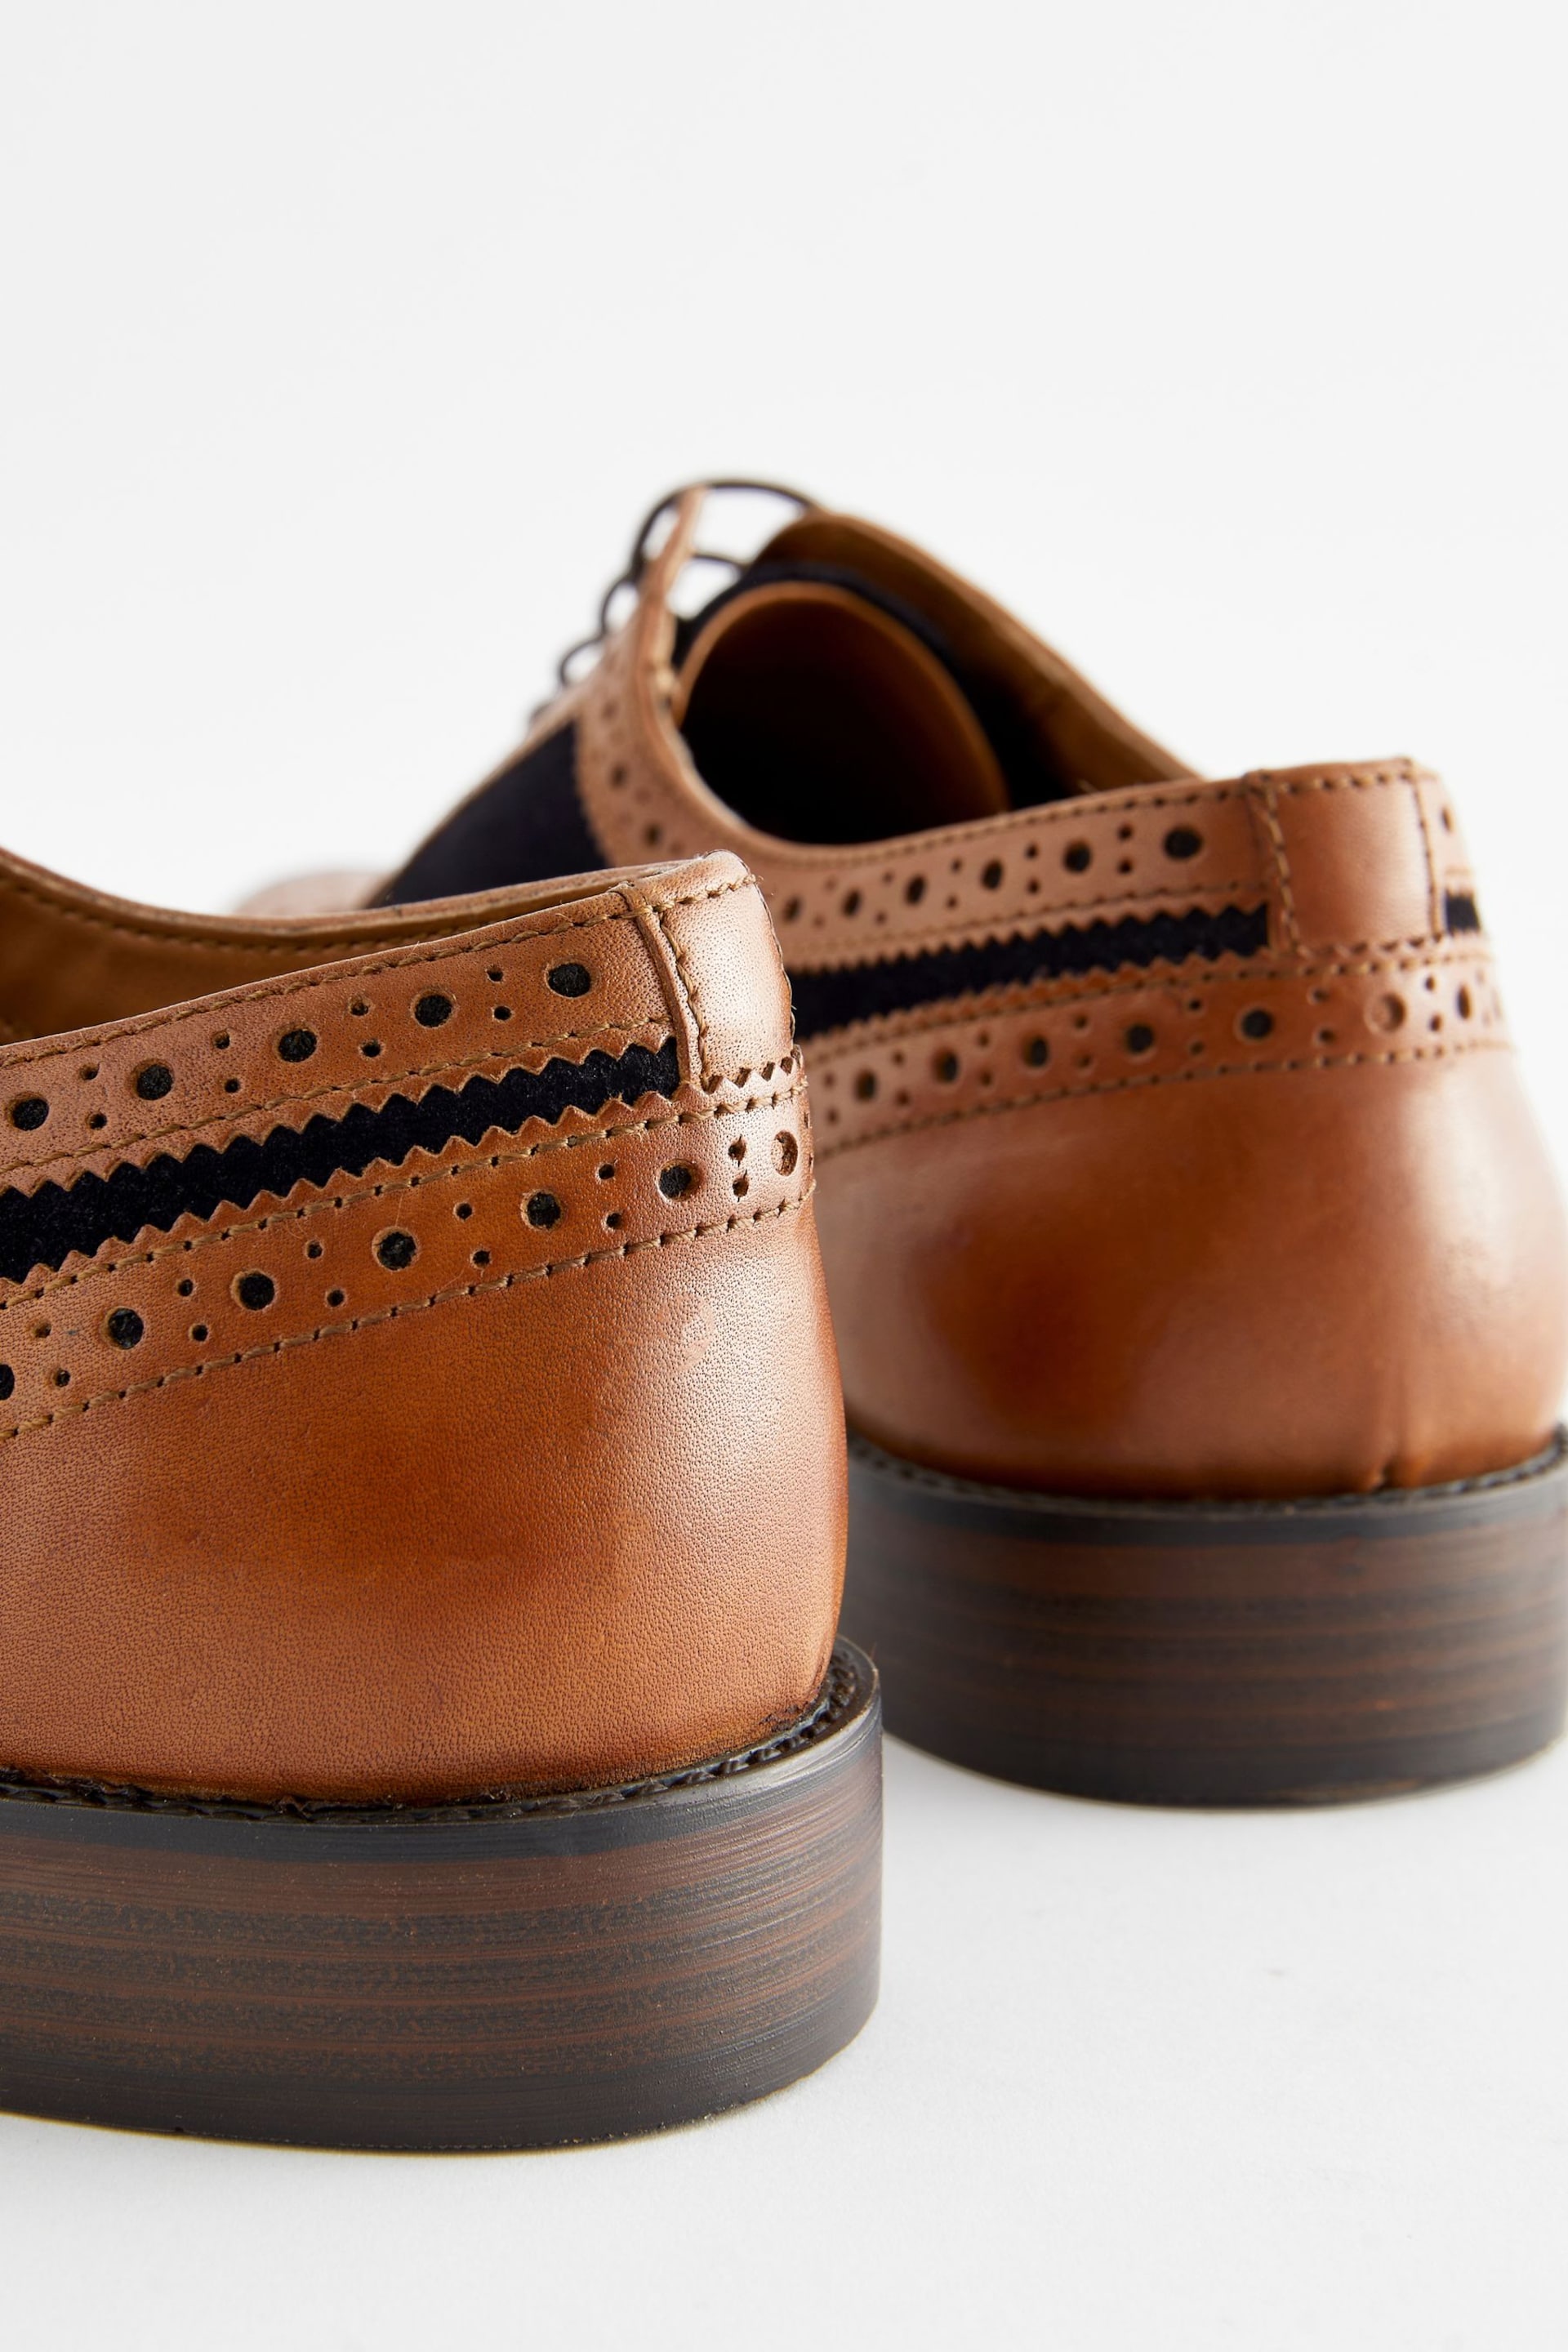 Tan/Navy Leather Contrast Panel Brogue Shoes - Image 4 of 6